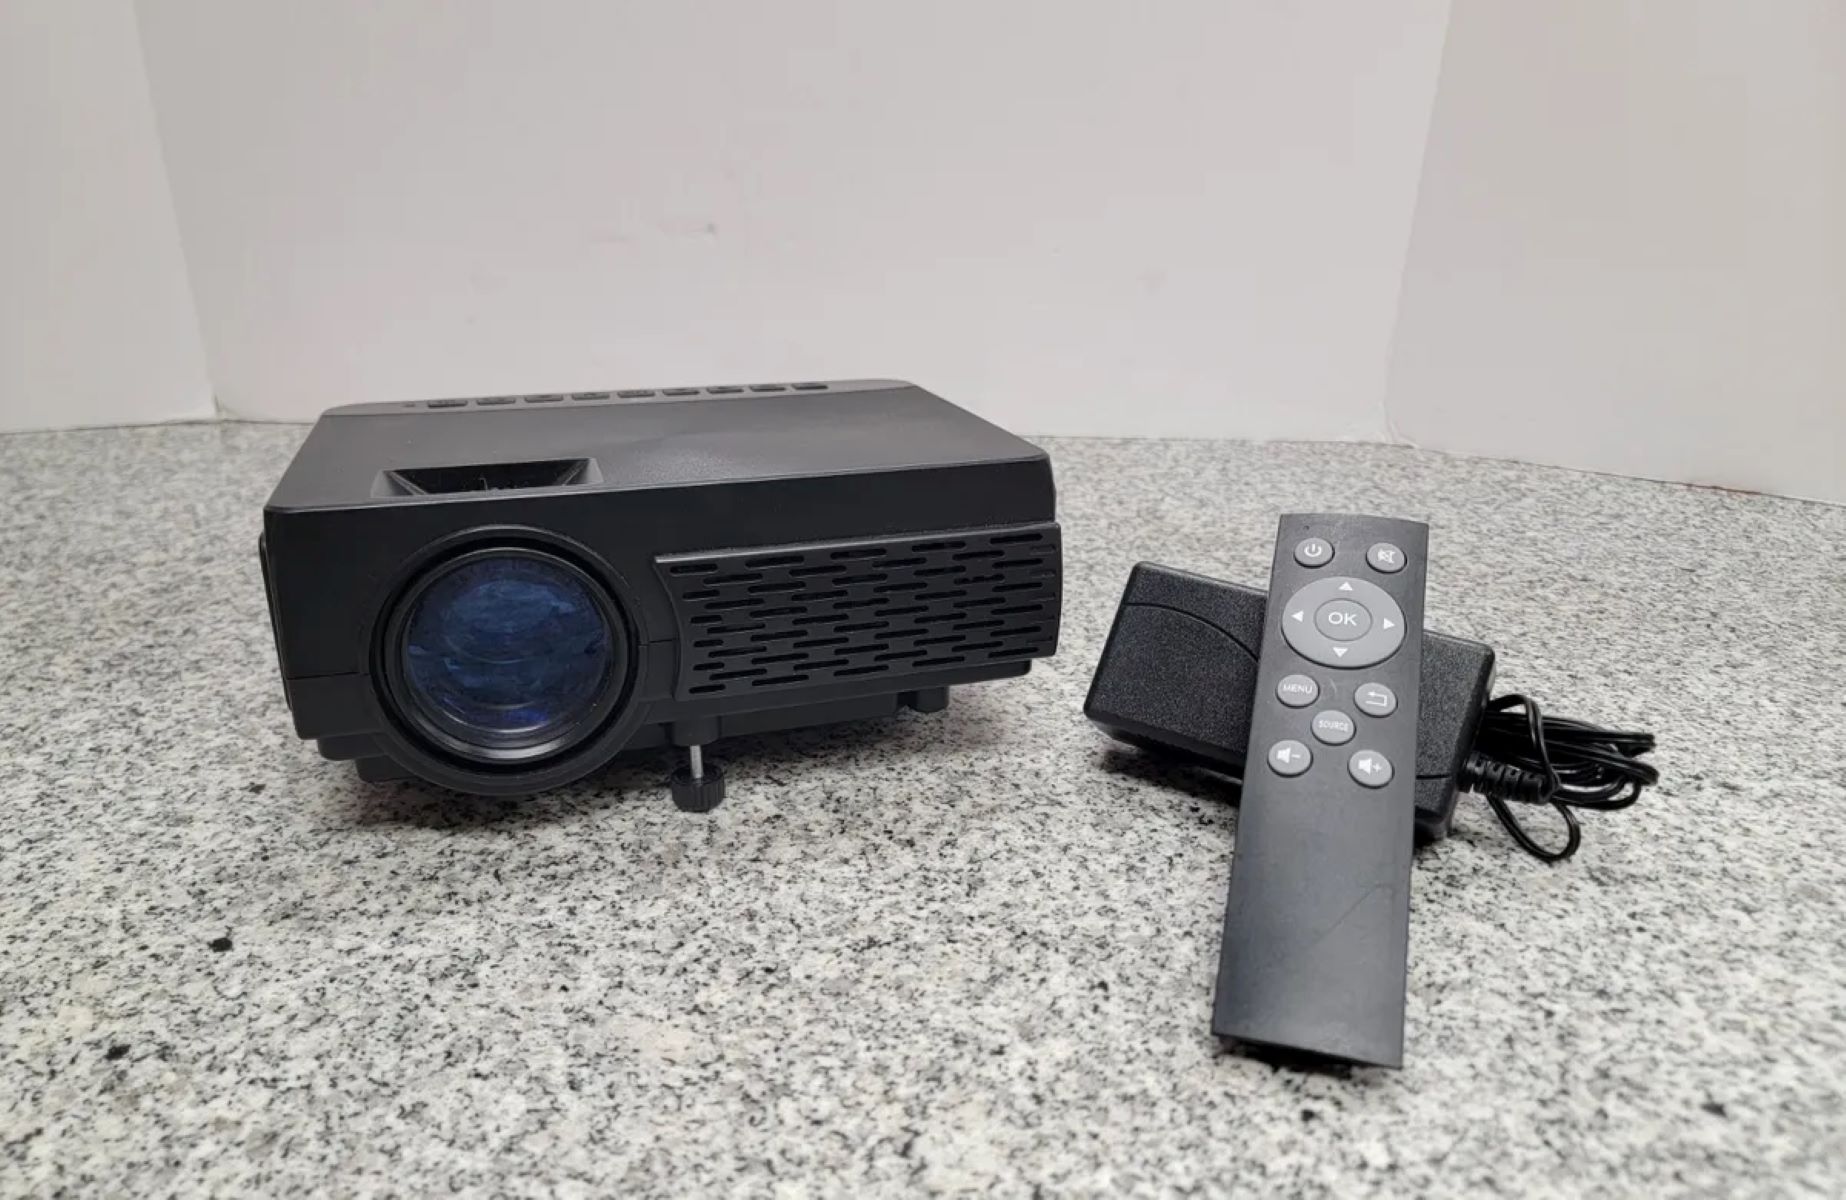 connecting-your-phone-to-gpx-mini-projector-easy-setup-guide